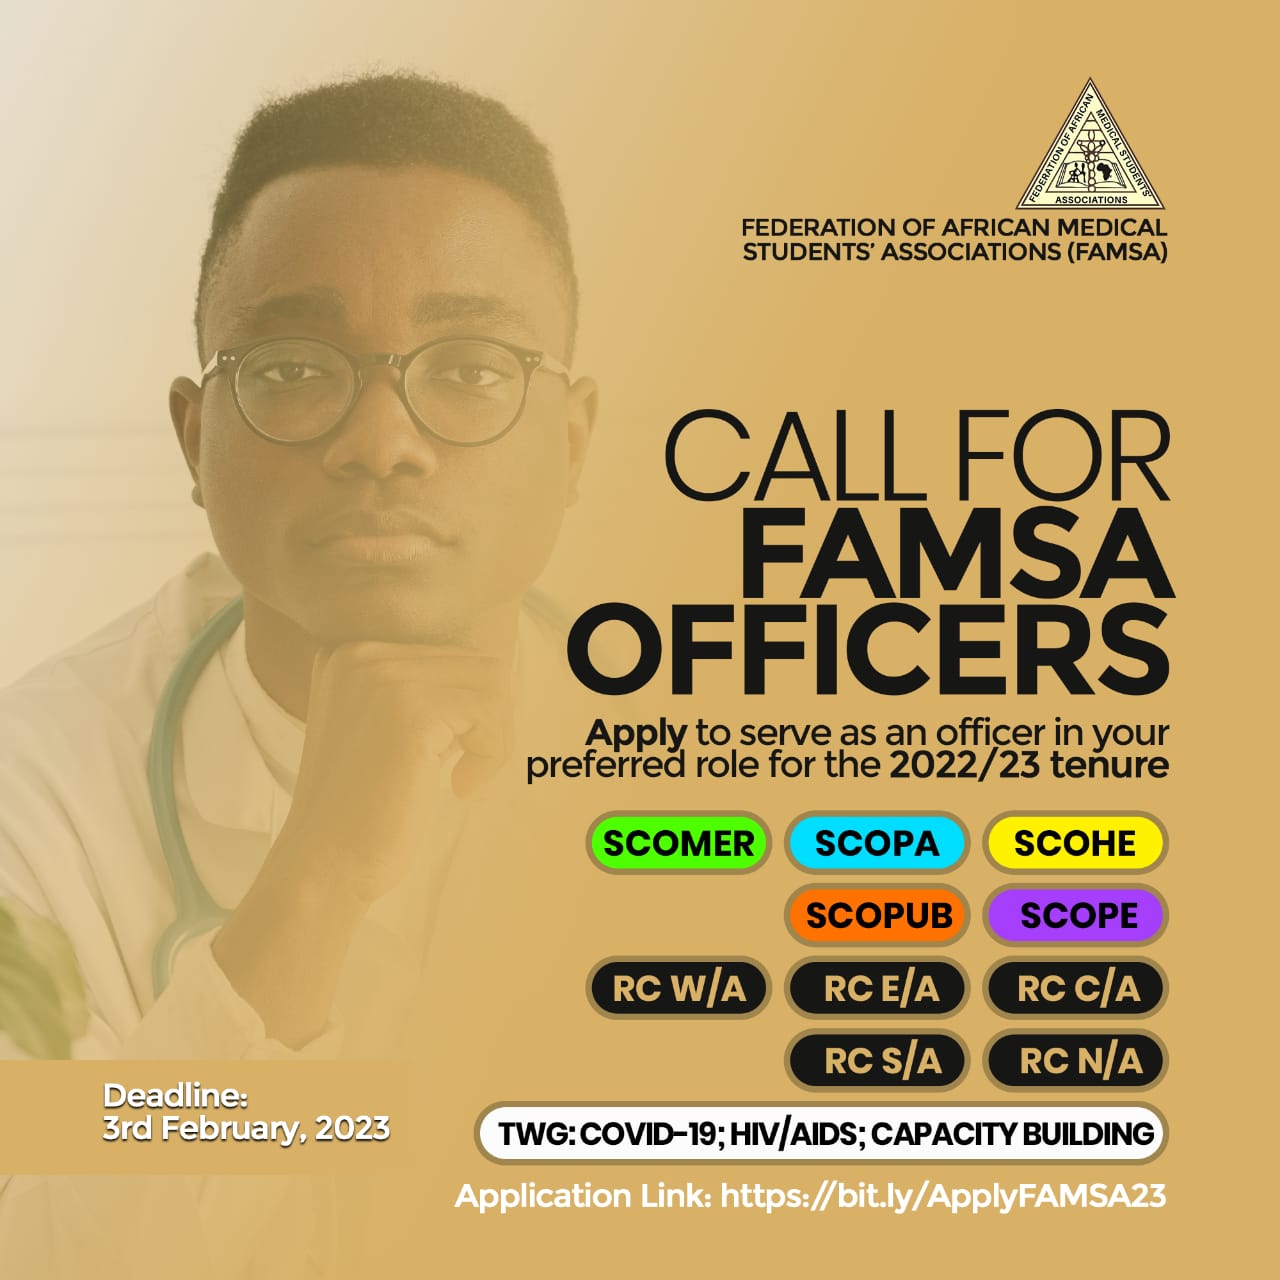 CALL FOR FAMSA OFFICERS